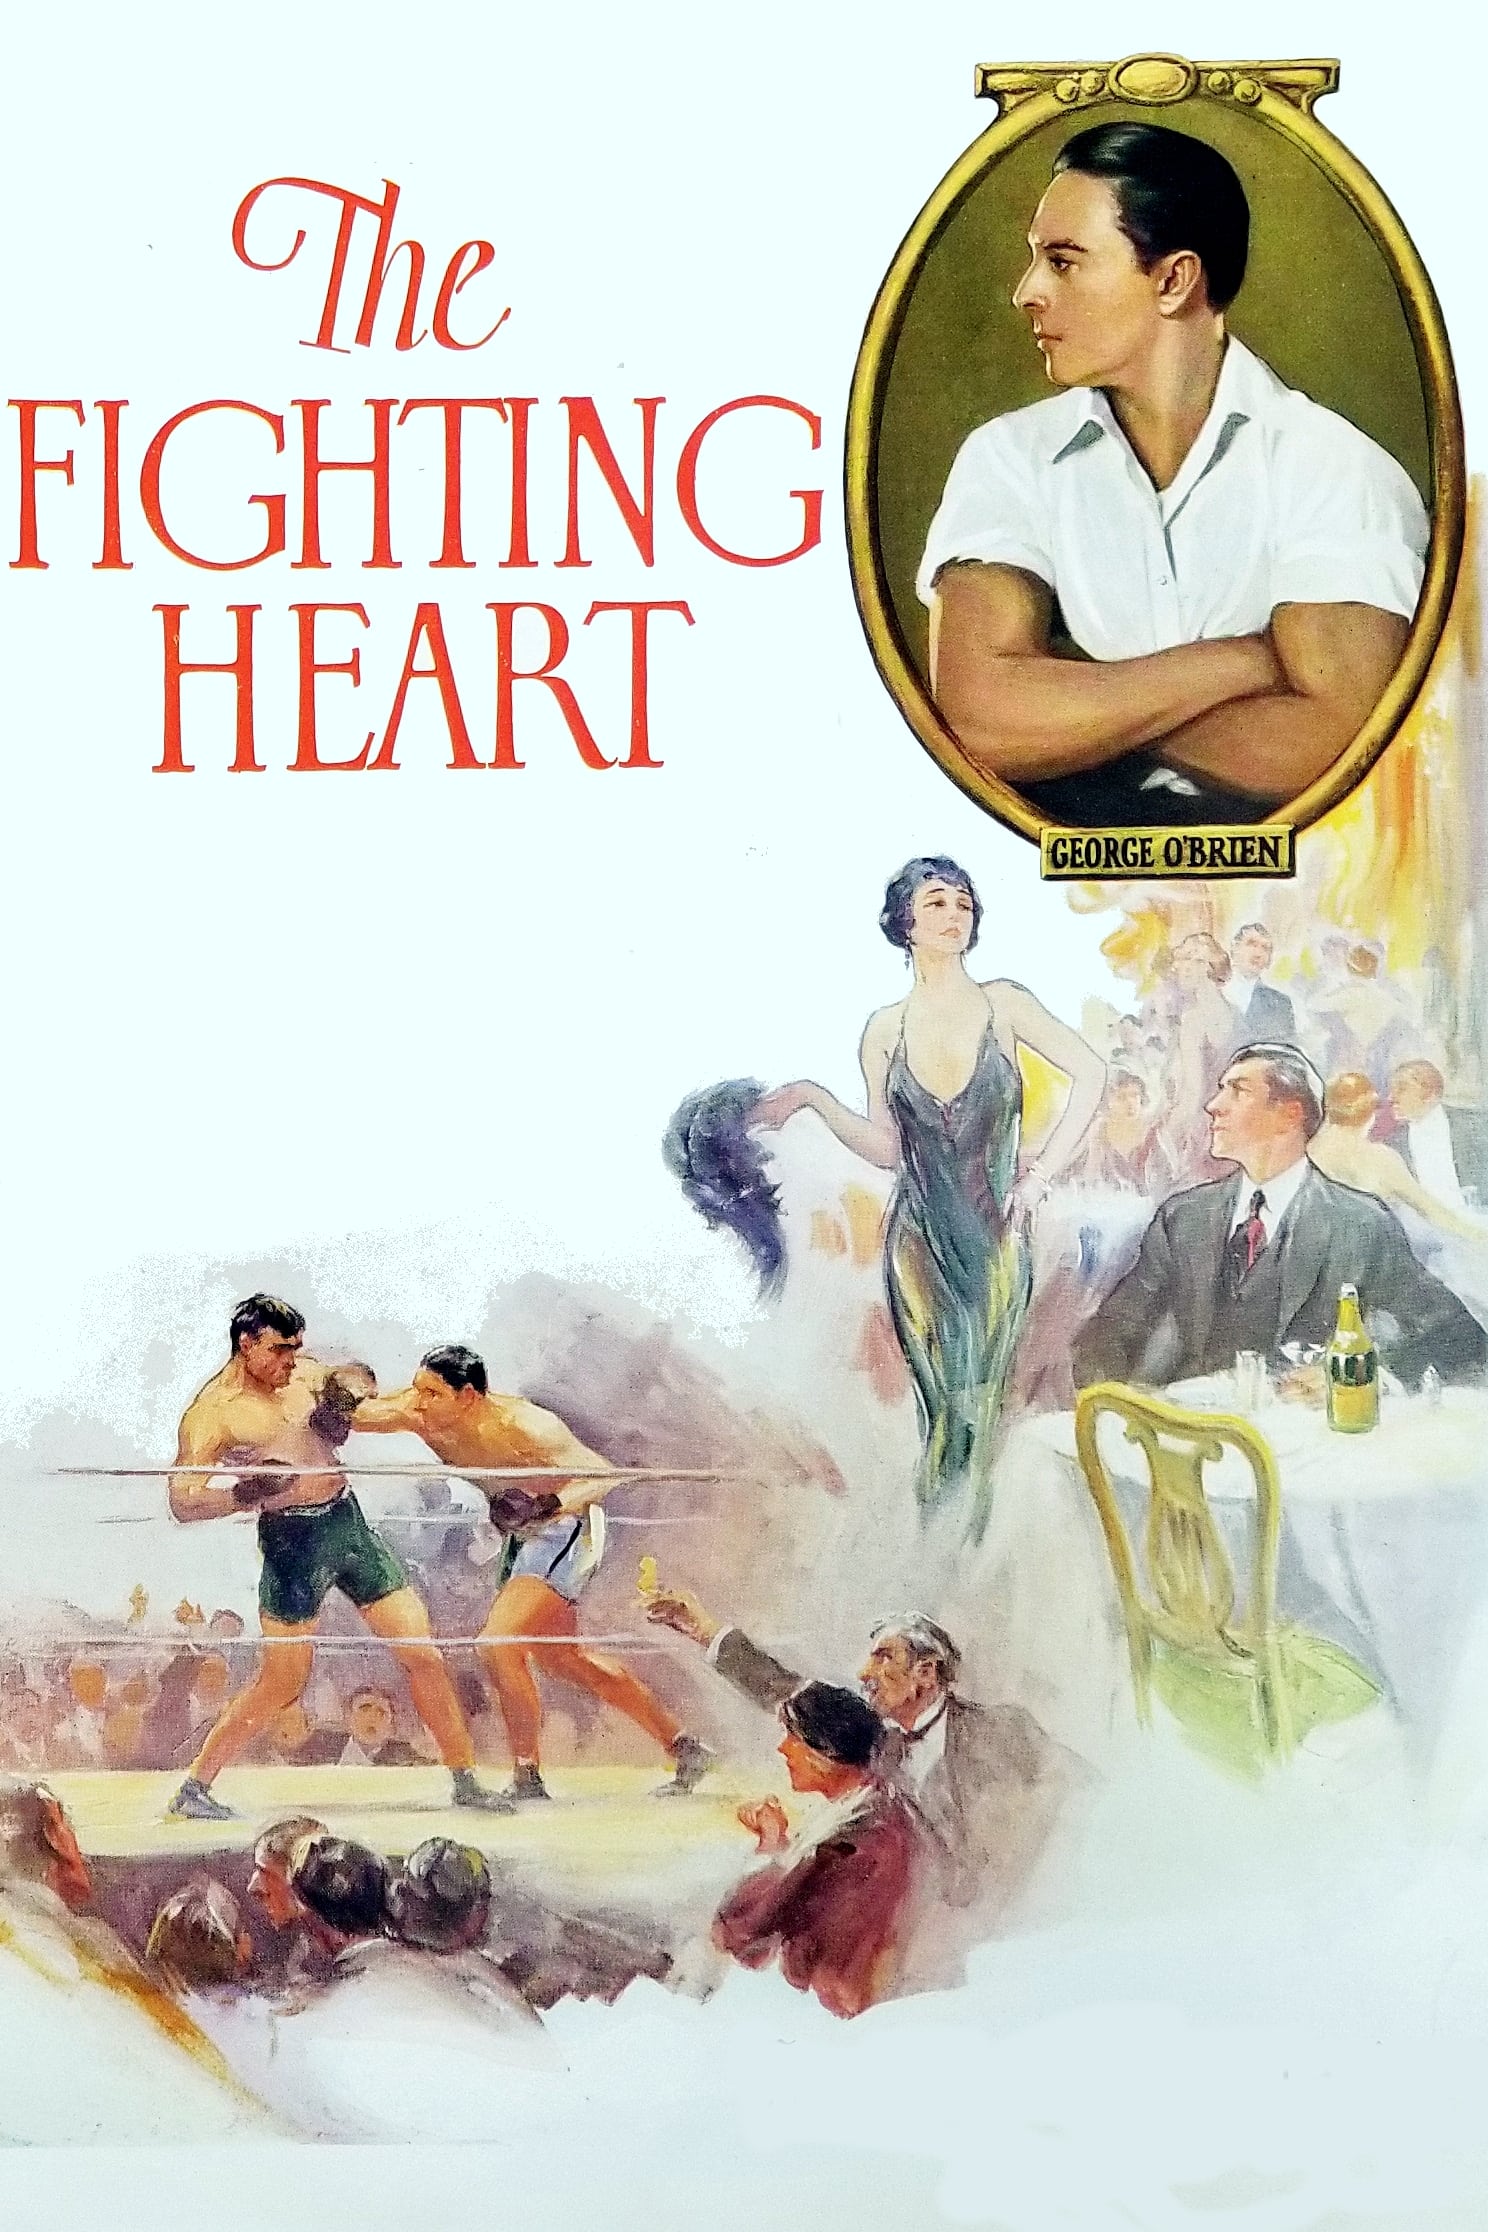 The Fighting Heart film